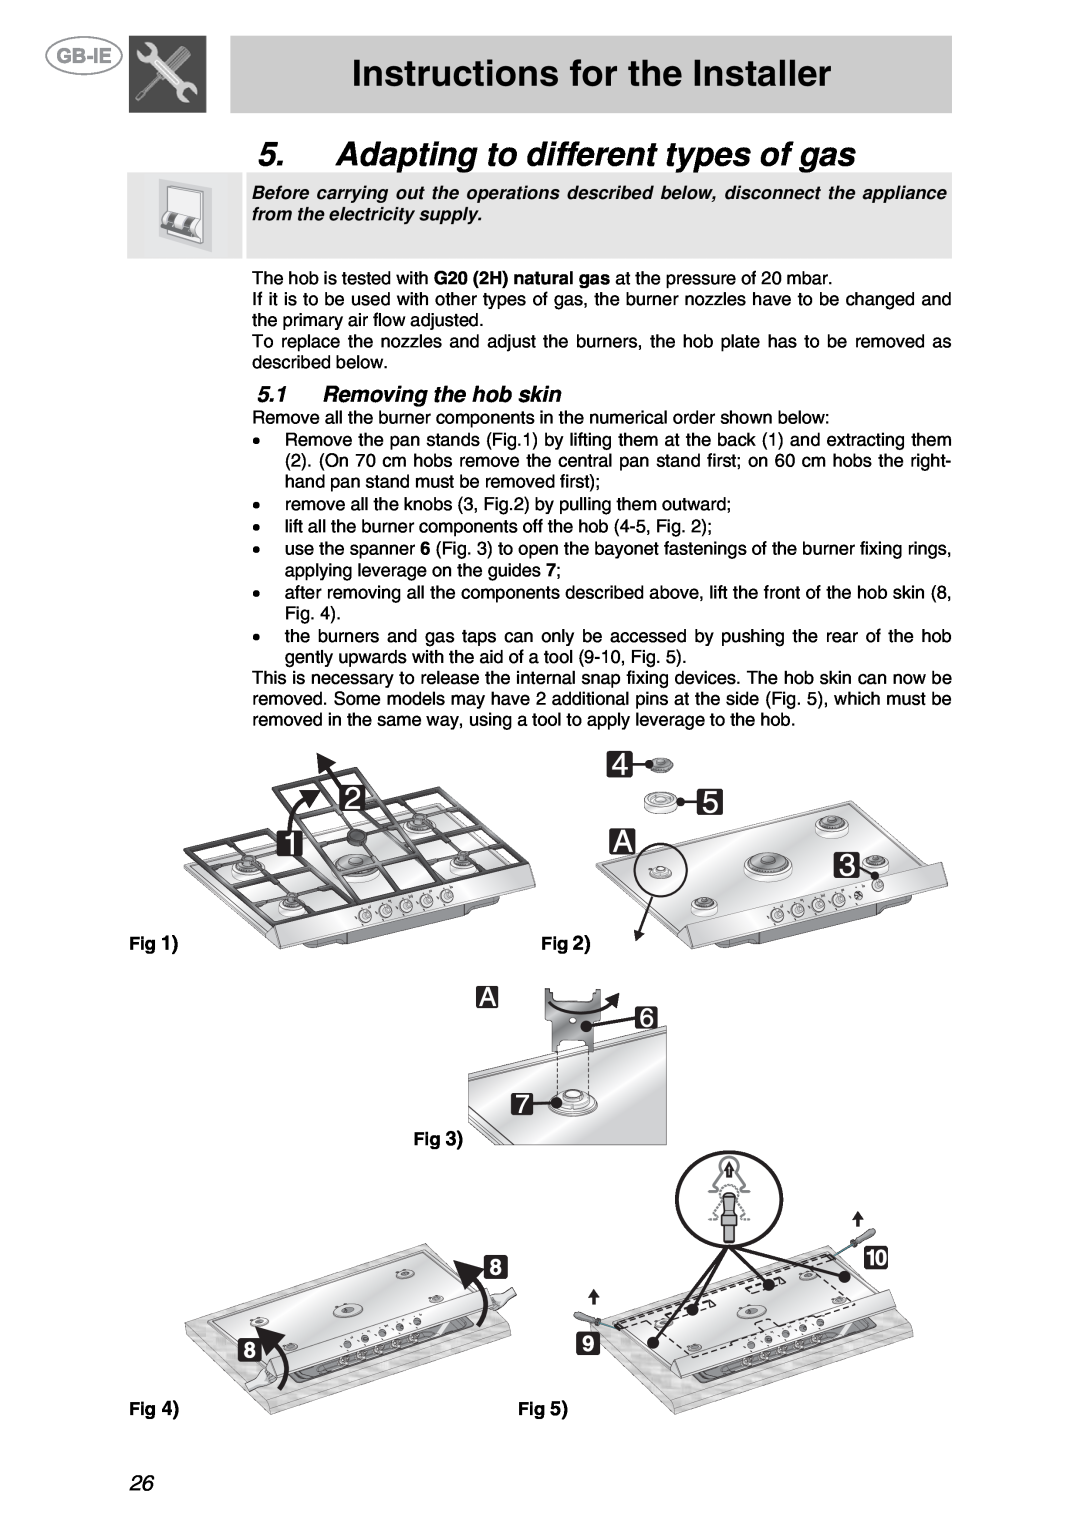 Smeg XXPTS725 manual Adapting to different types of gas, Removing the hob skin, Instructions for the Installer 